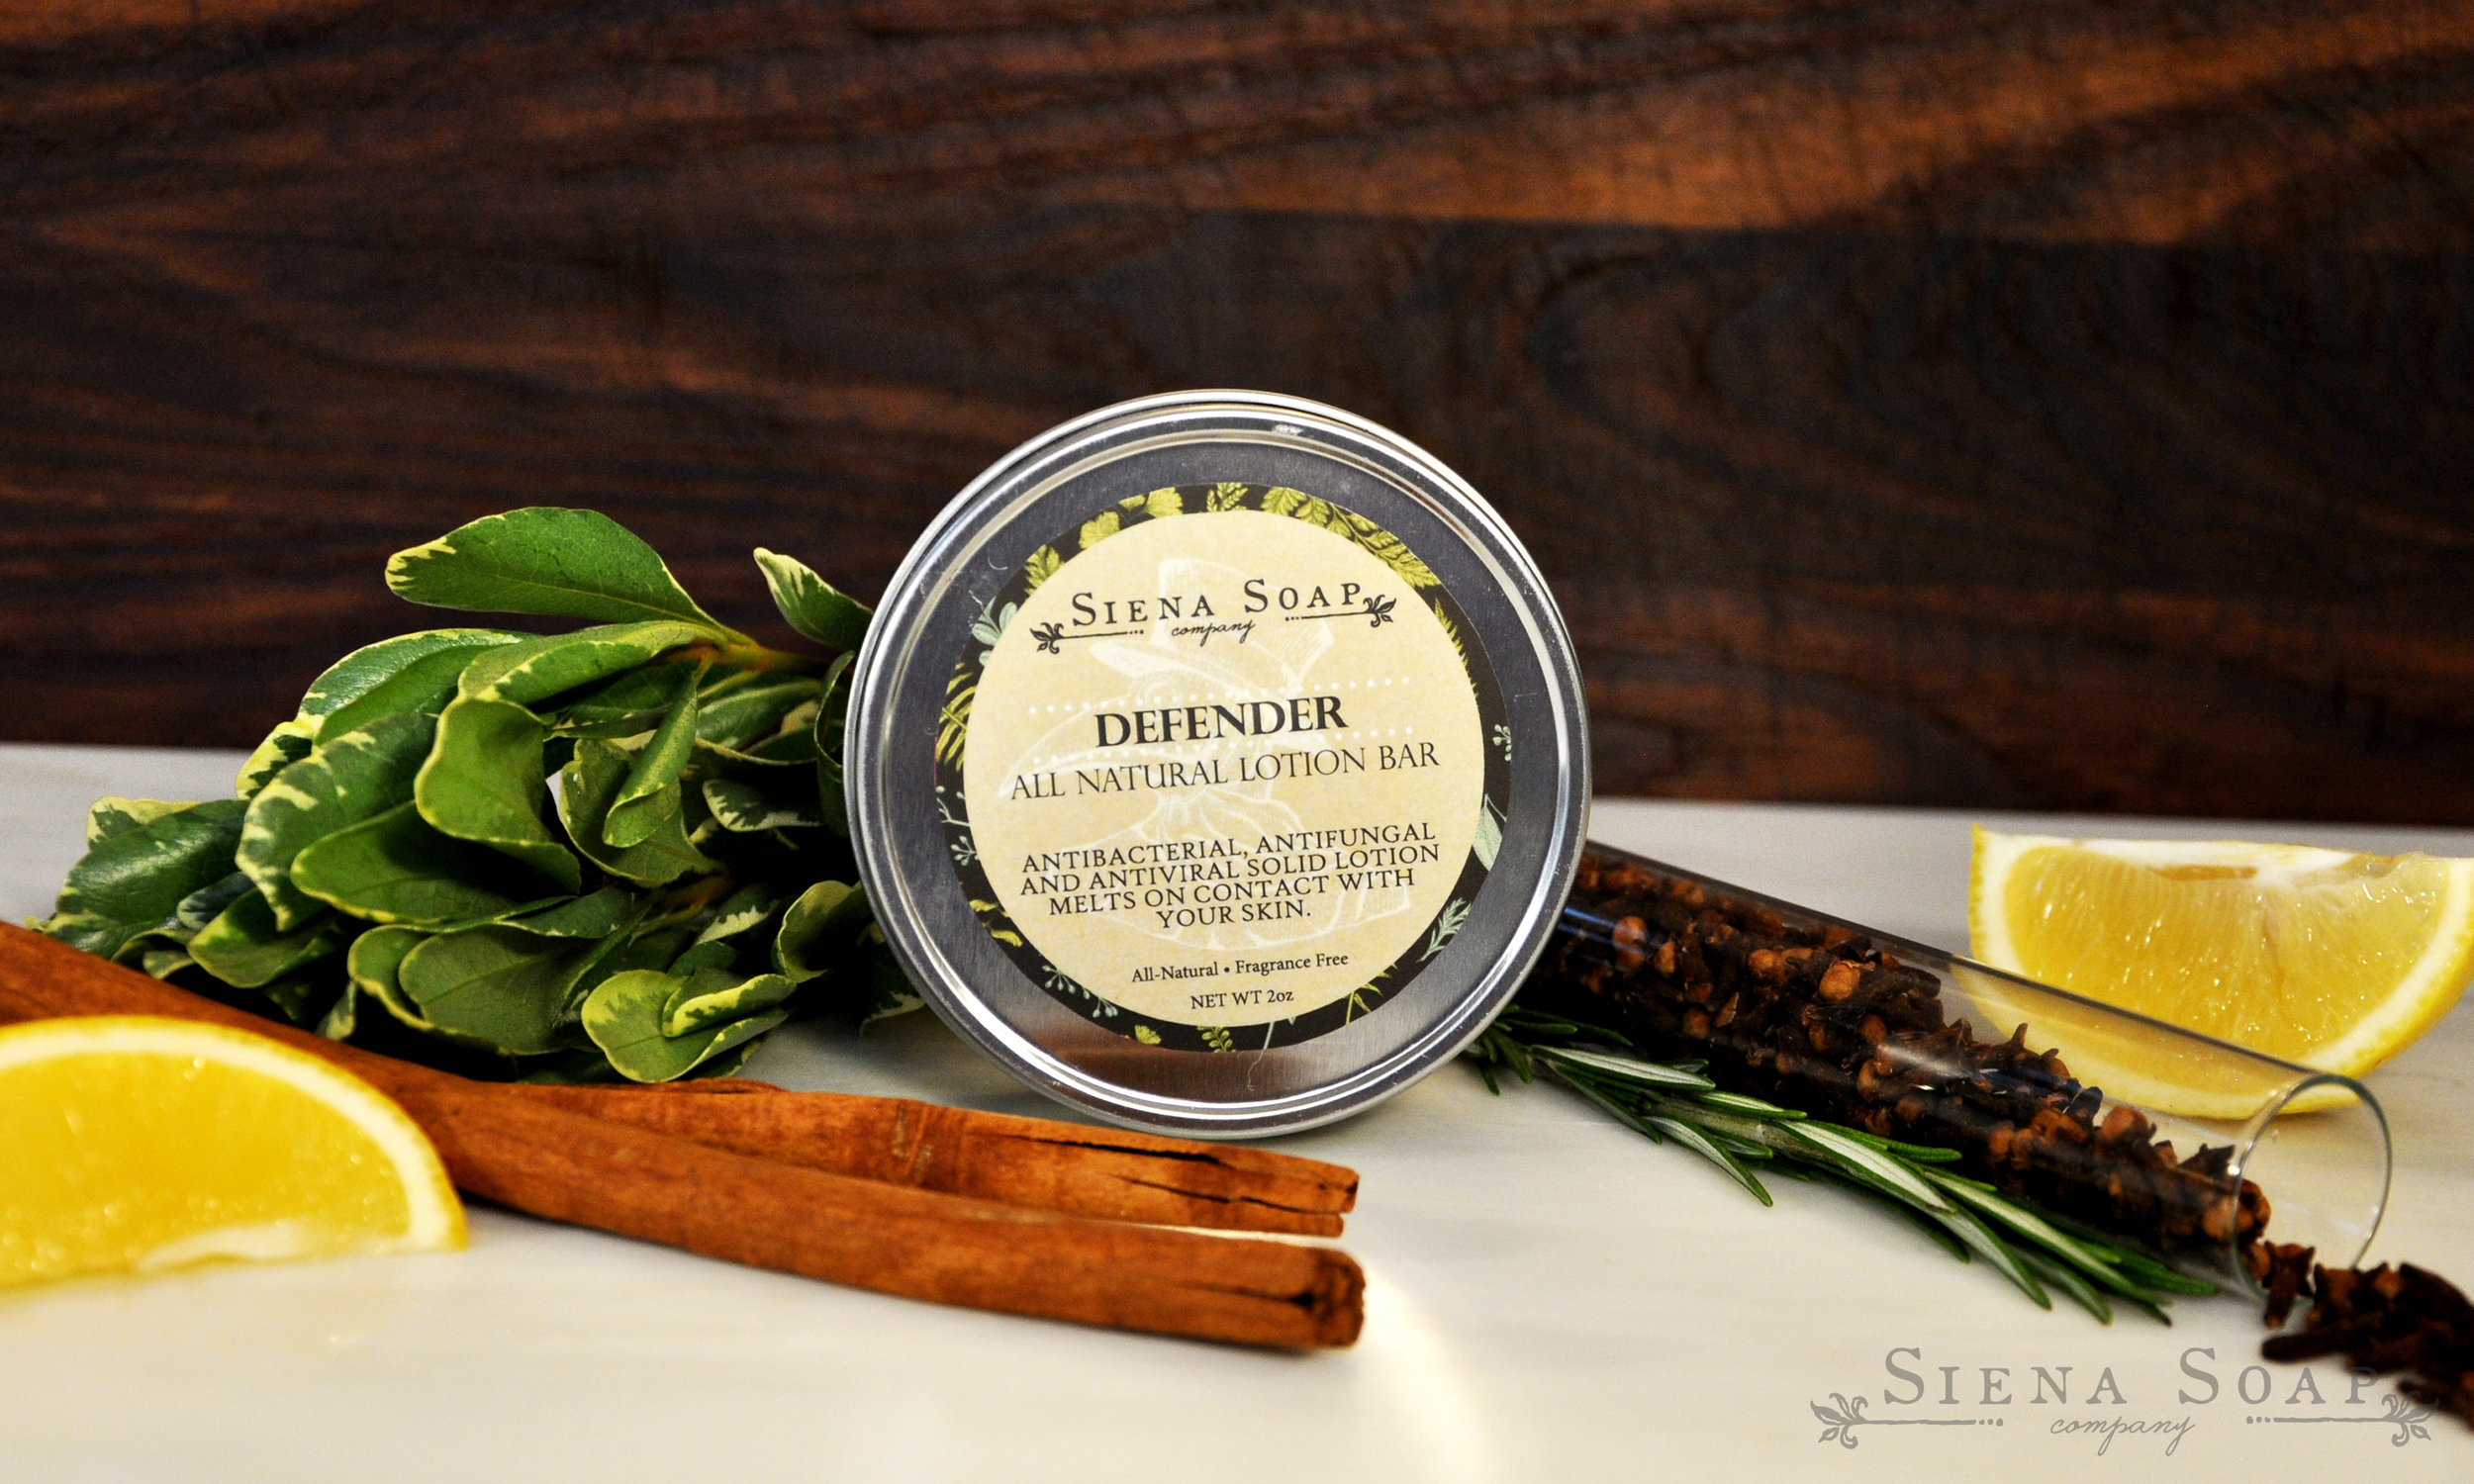 DEFENDER (FORMALLY KNOWN AS FOUR THIEVES) LOTION BAR — Siena Soap Company